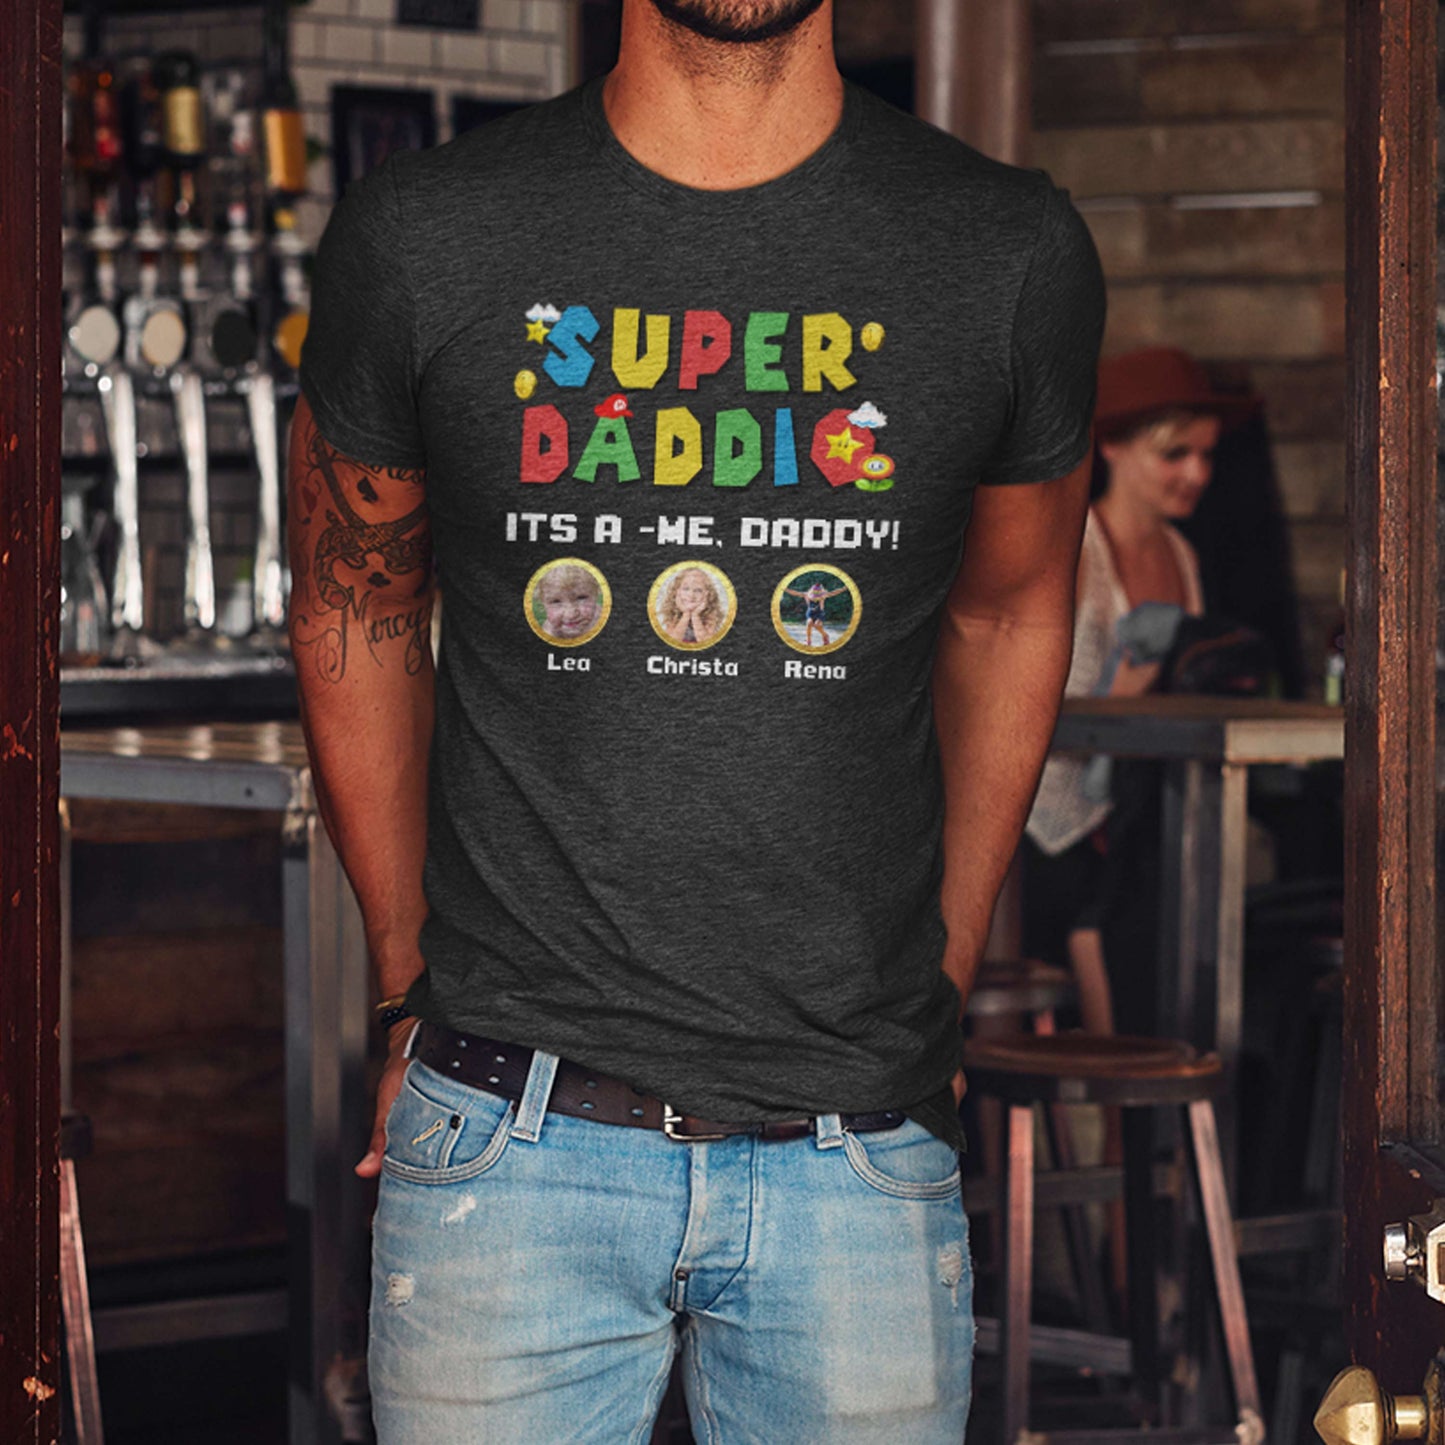 Custom Super Daddio Game Shirt For Dads, Add 1 To 6 Child photos, Father's Day Shirt, Dad Tee, Dad Gift